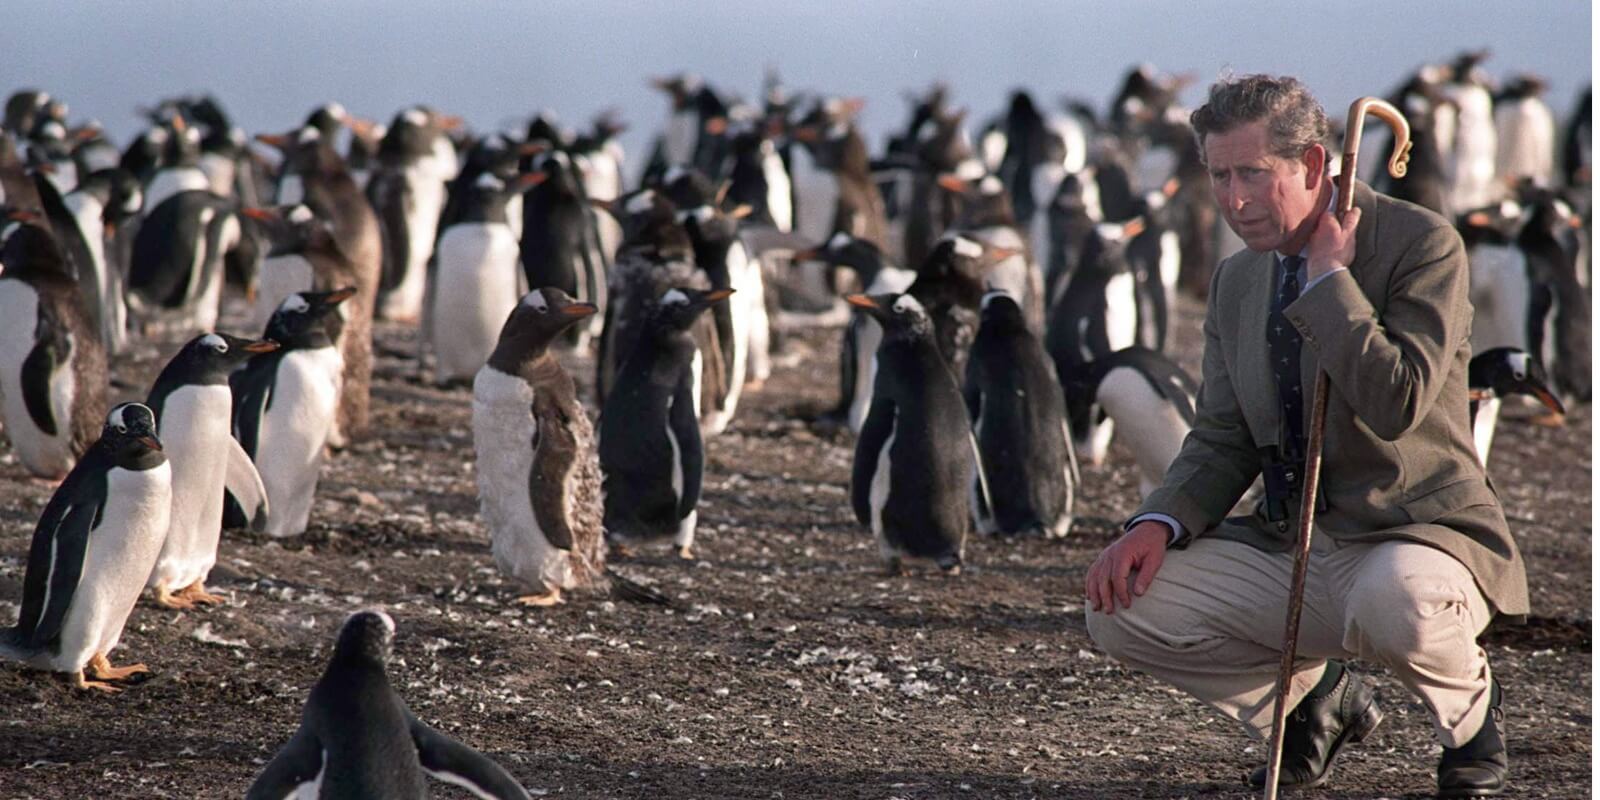 King Charles passion for the environment is on display in a visit to Sea Lion Island in the Falkland's in 1999.